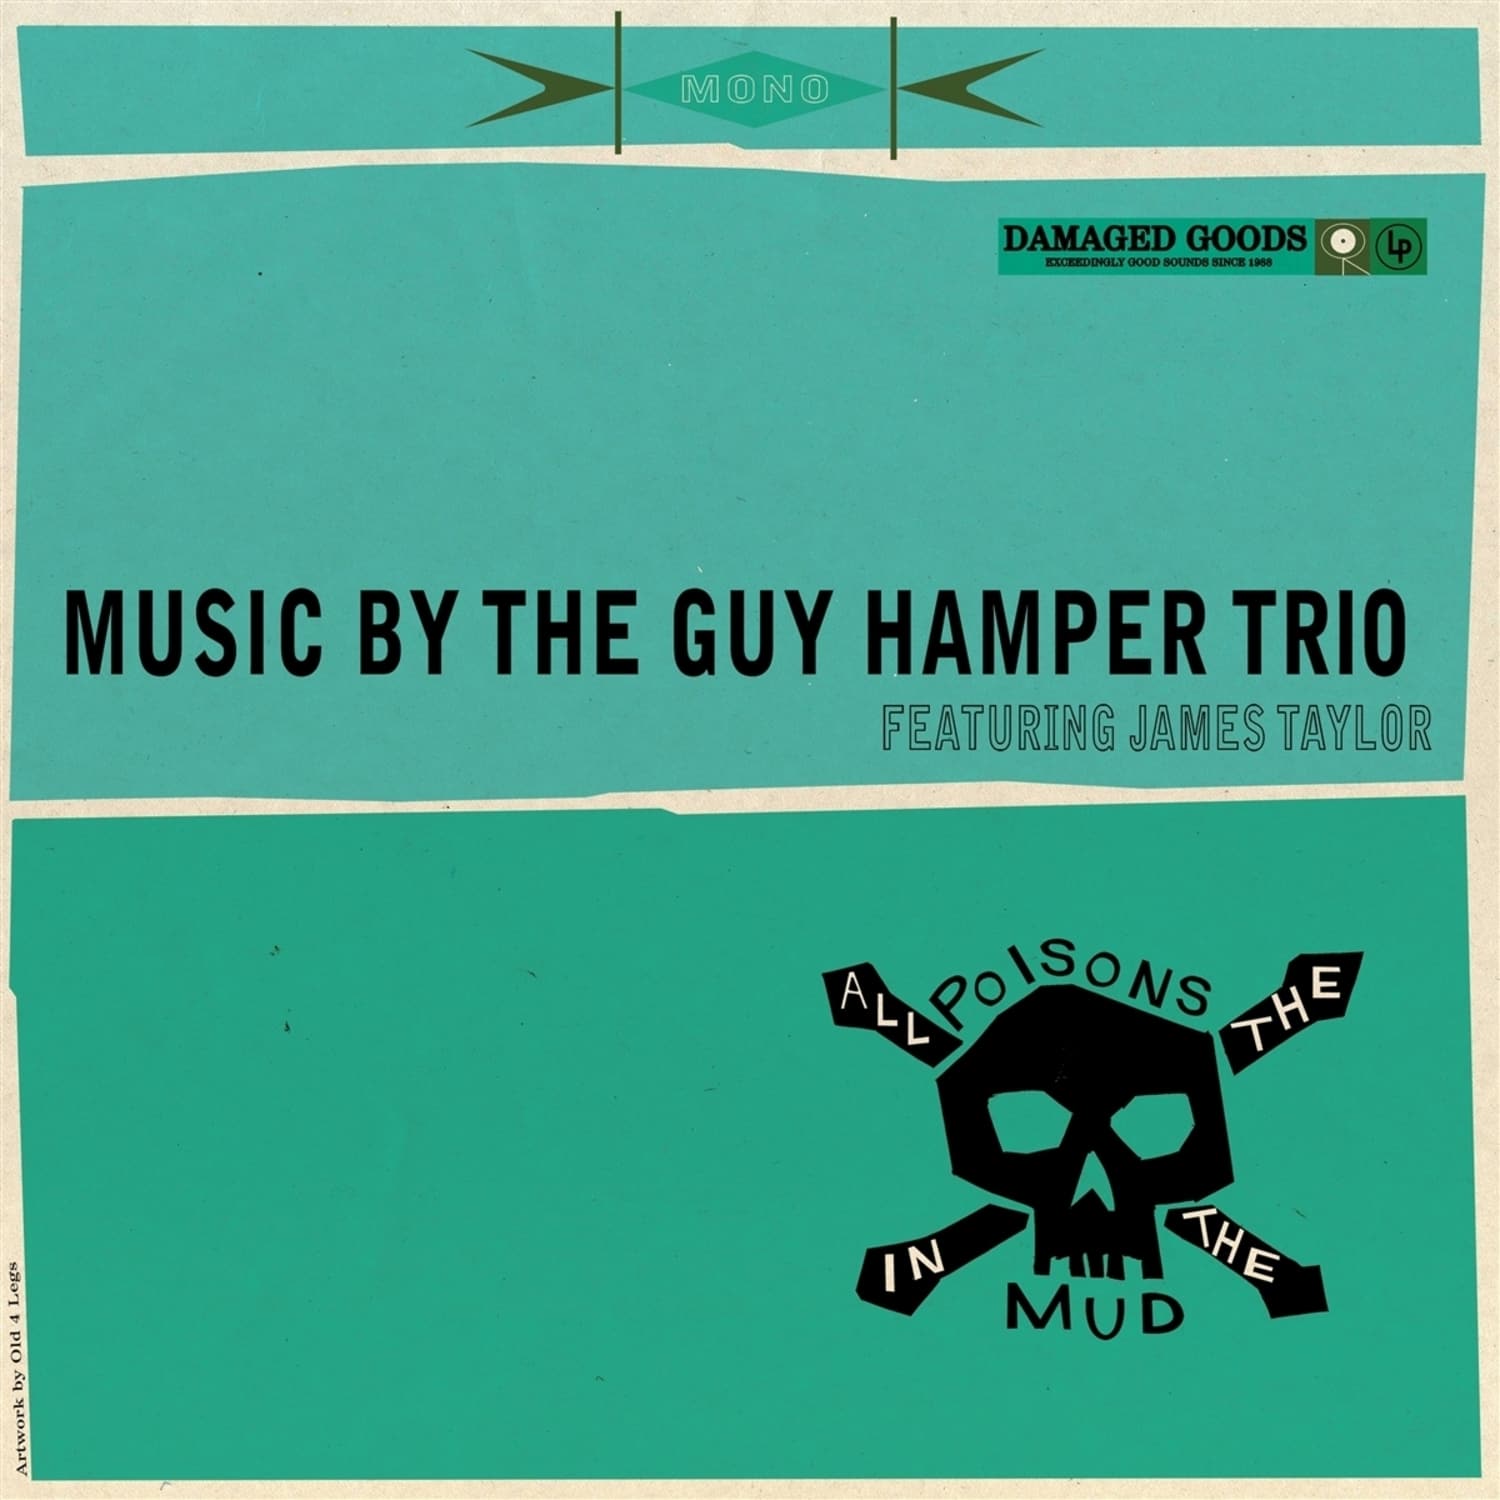  The Guy Hamper Trio Featuring James Taylor - ALL THE POISONS IN THE MUD 